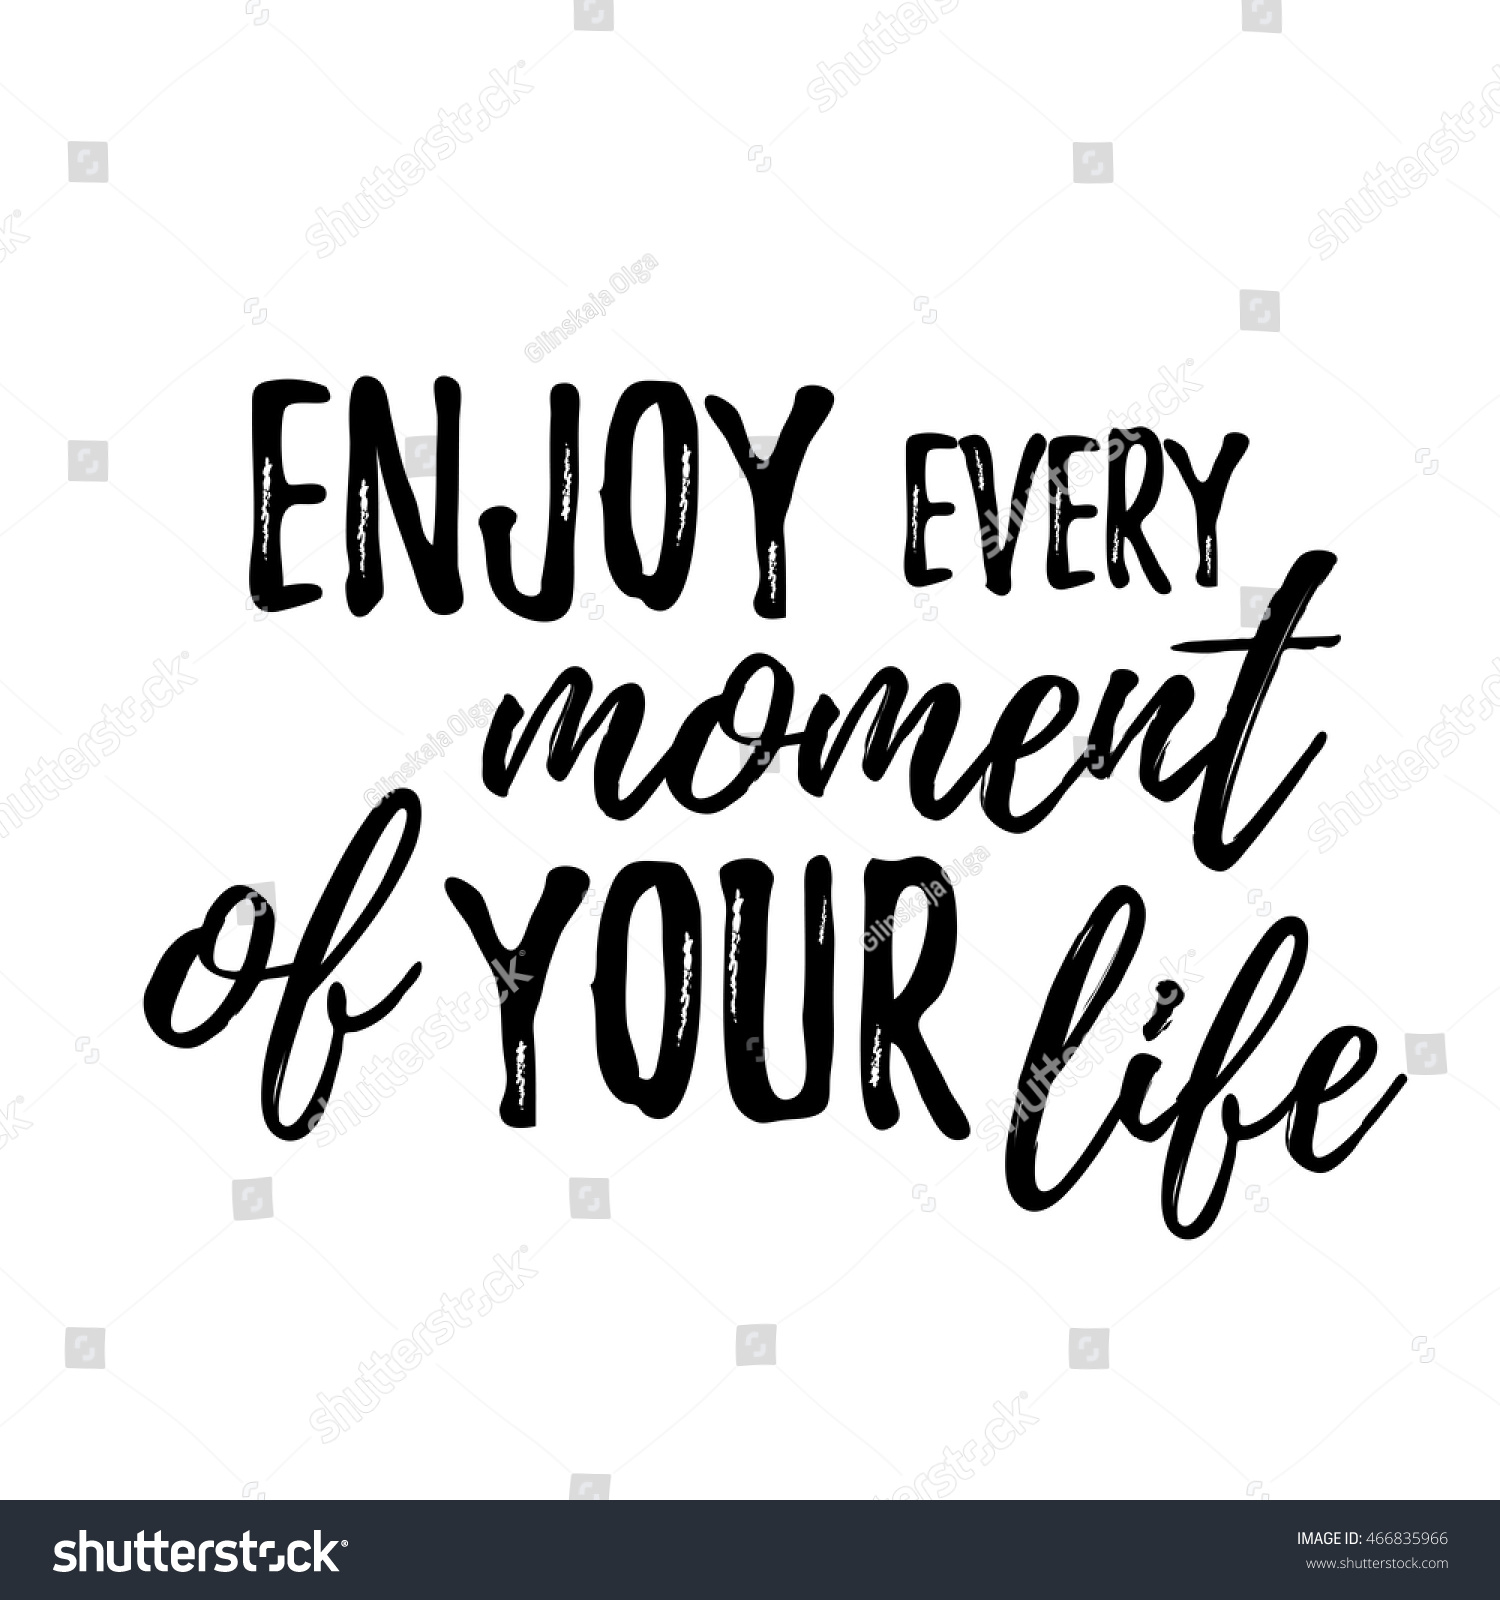 Enjoy every moment of your life Lettering inspirational quote design for posters t